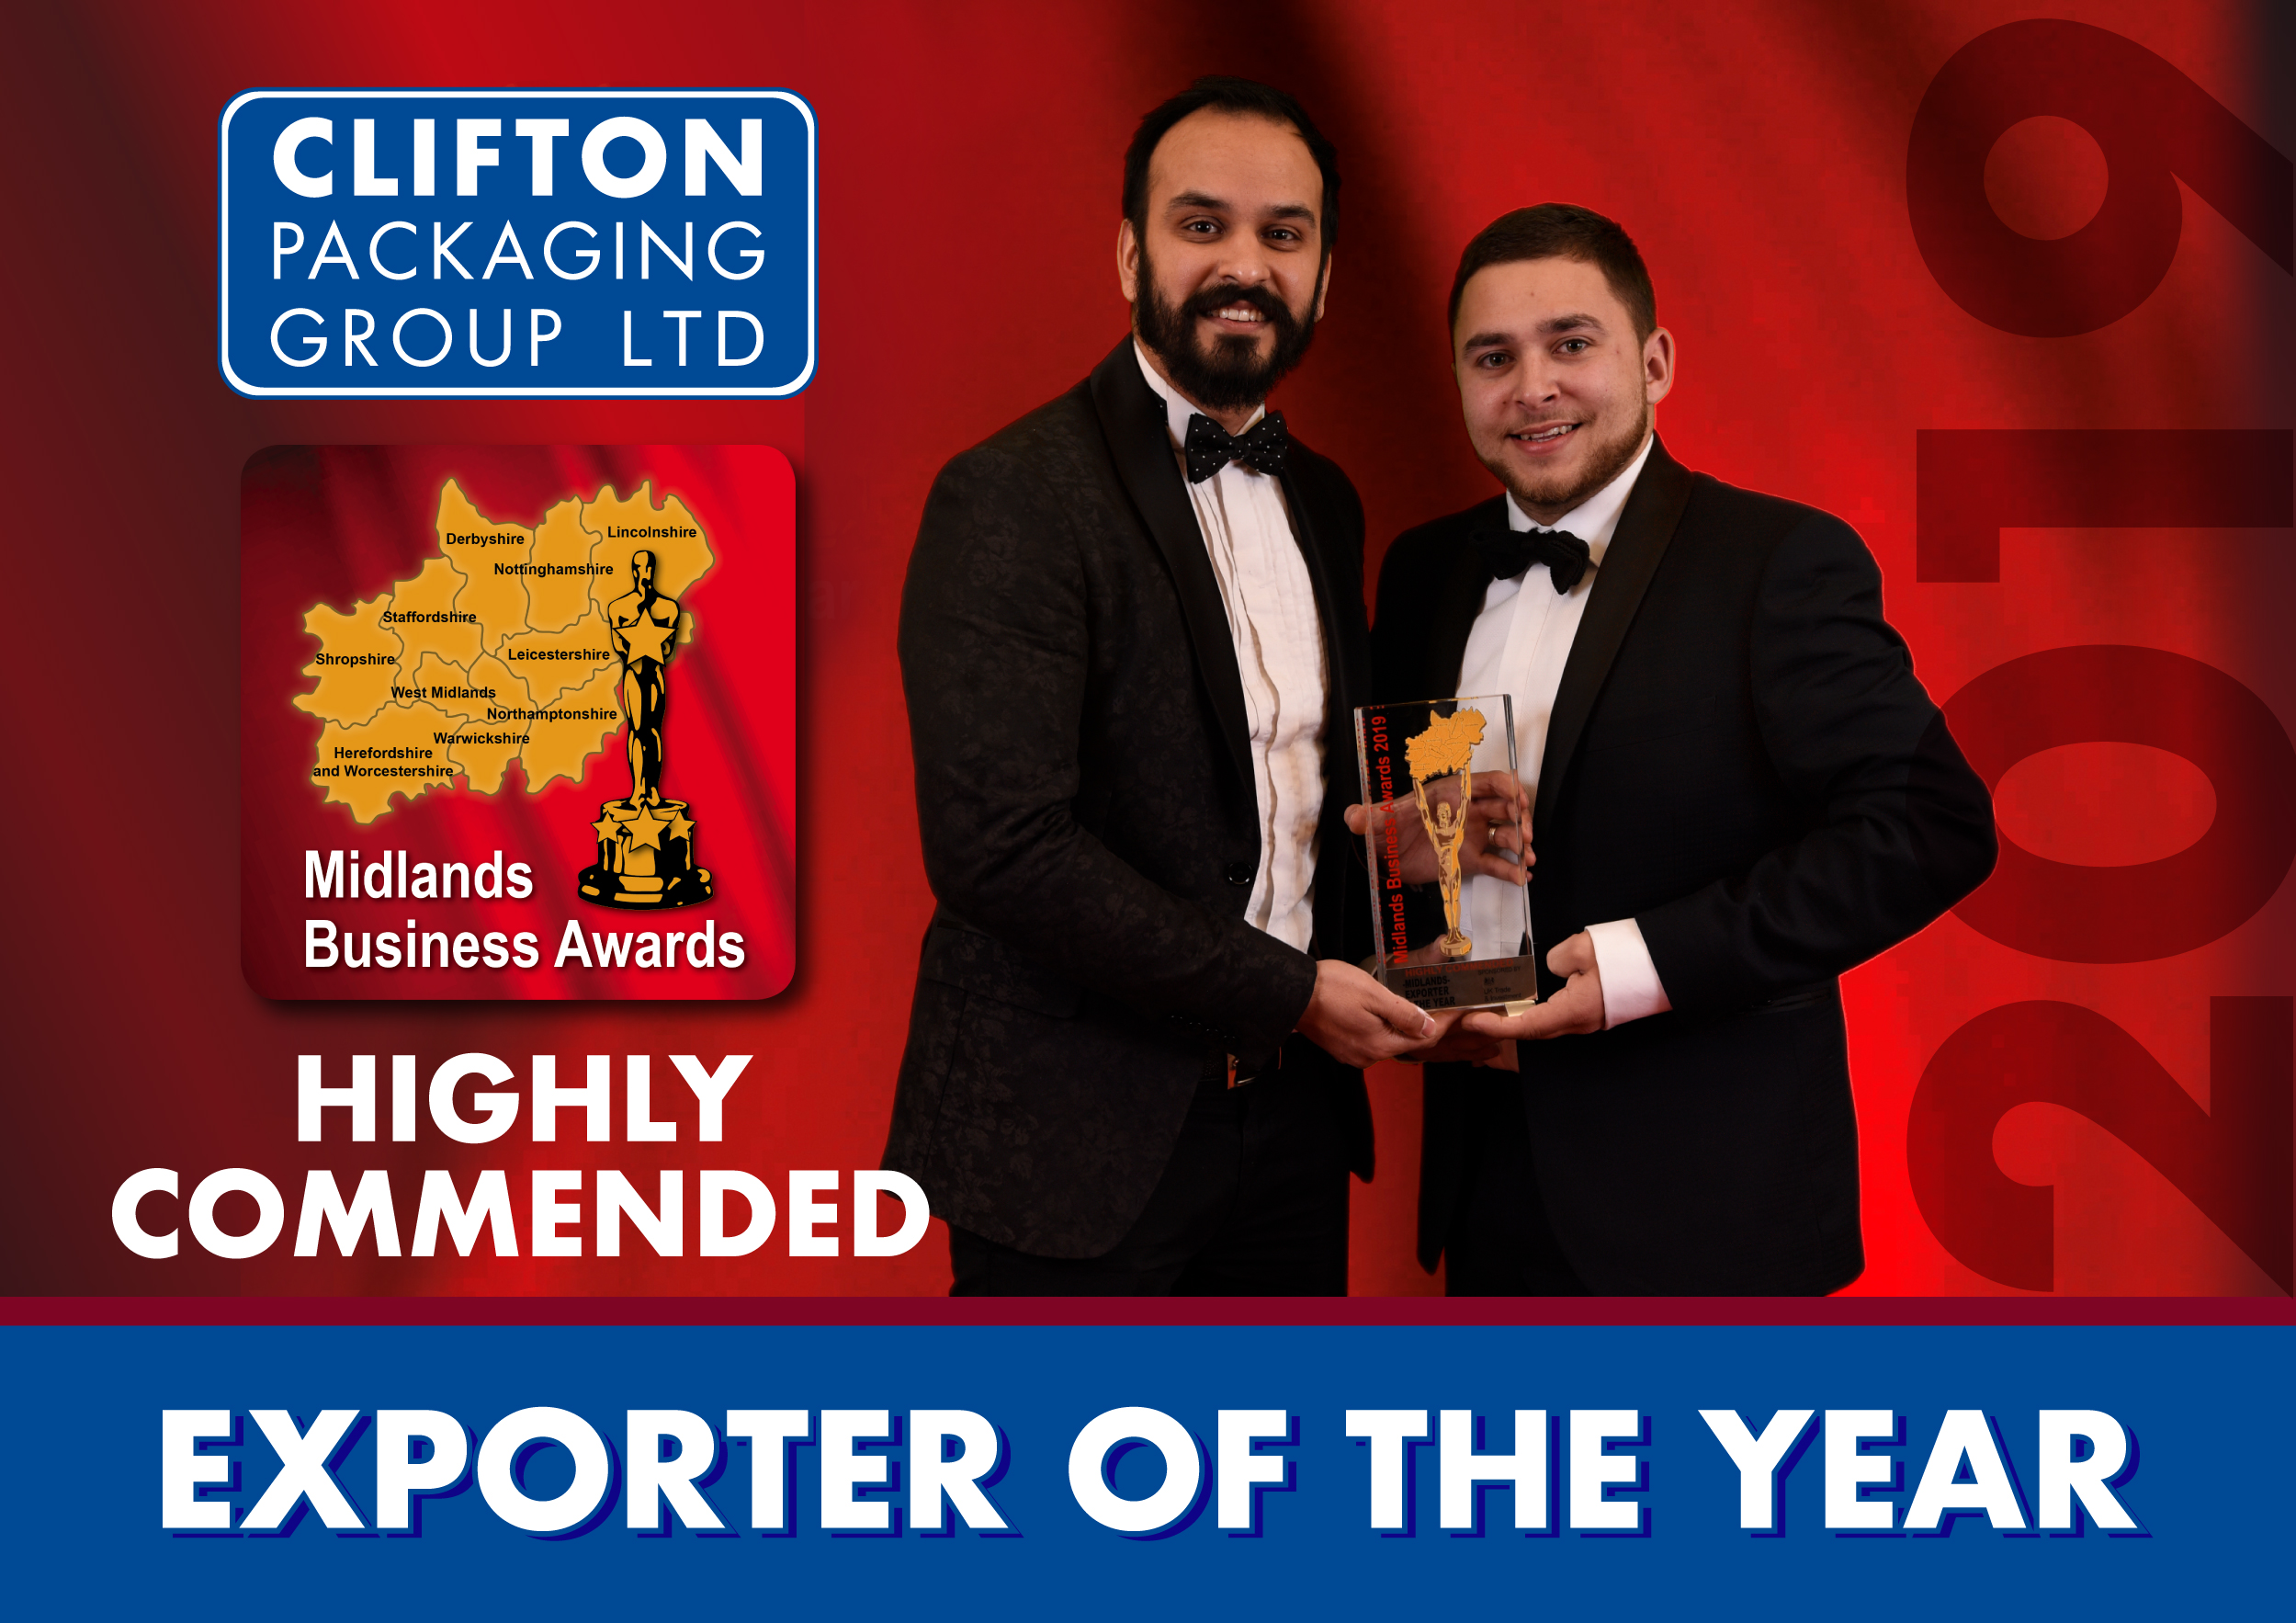 MBA Highly Commended 2019 - Exporter of the year